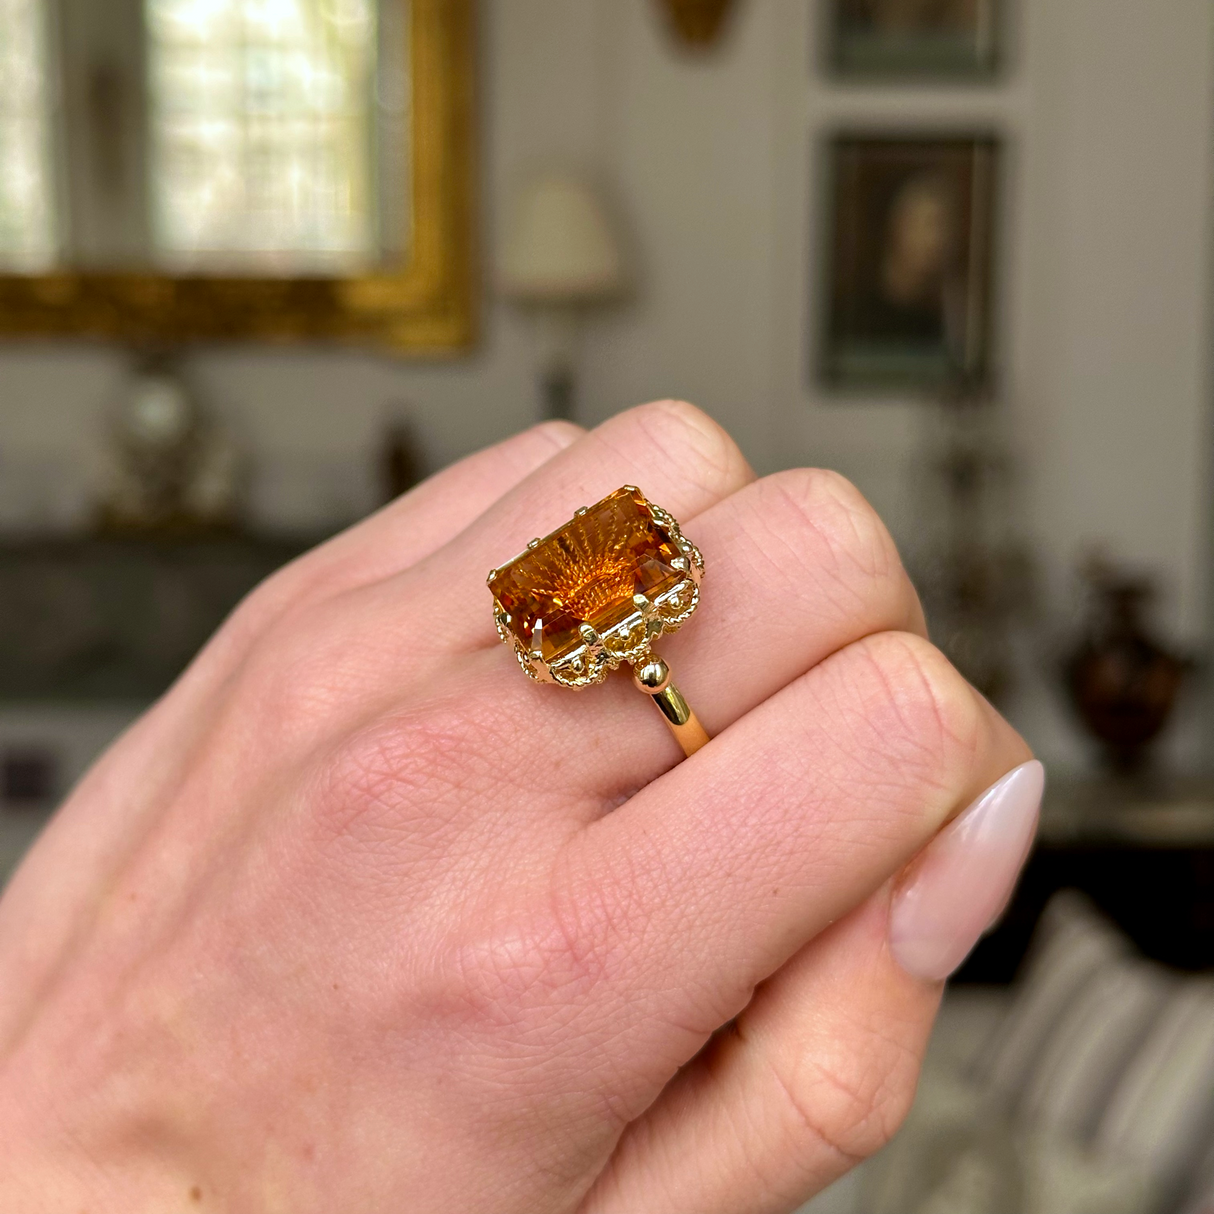 Antique, 1880s Citrine Ring with Rope Metal Work, worn on closed hand.